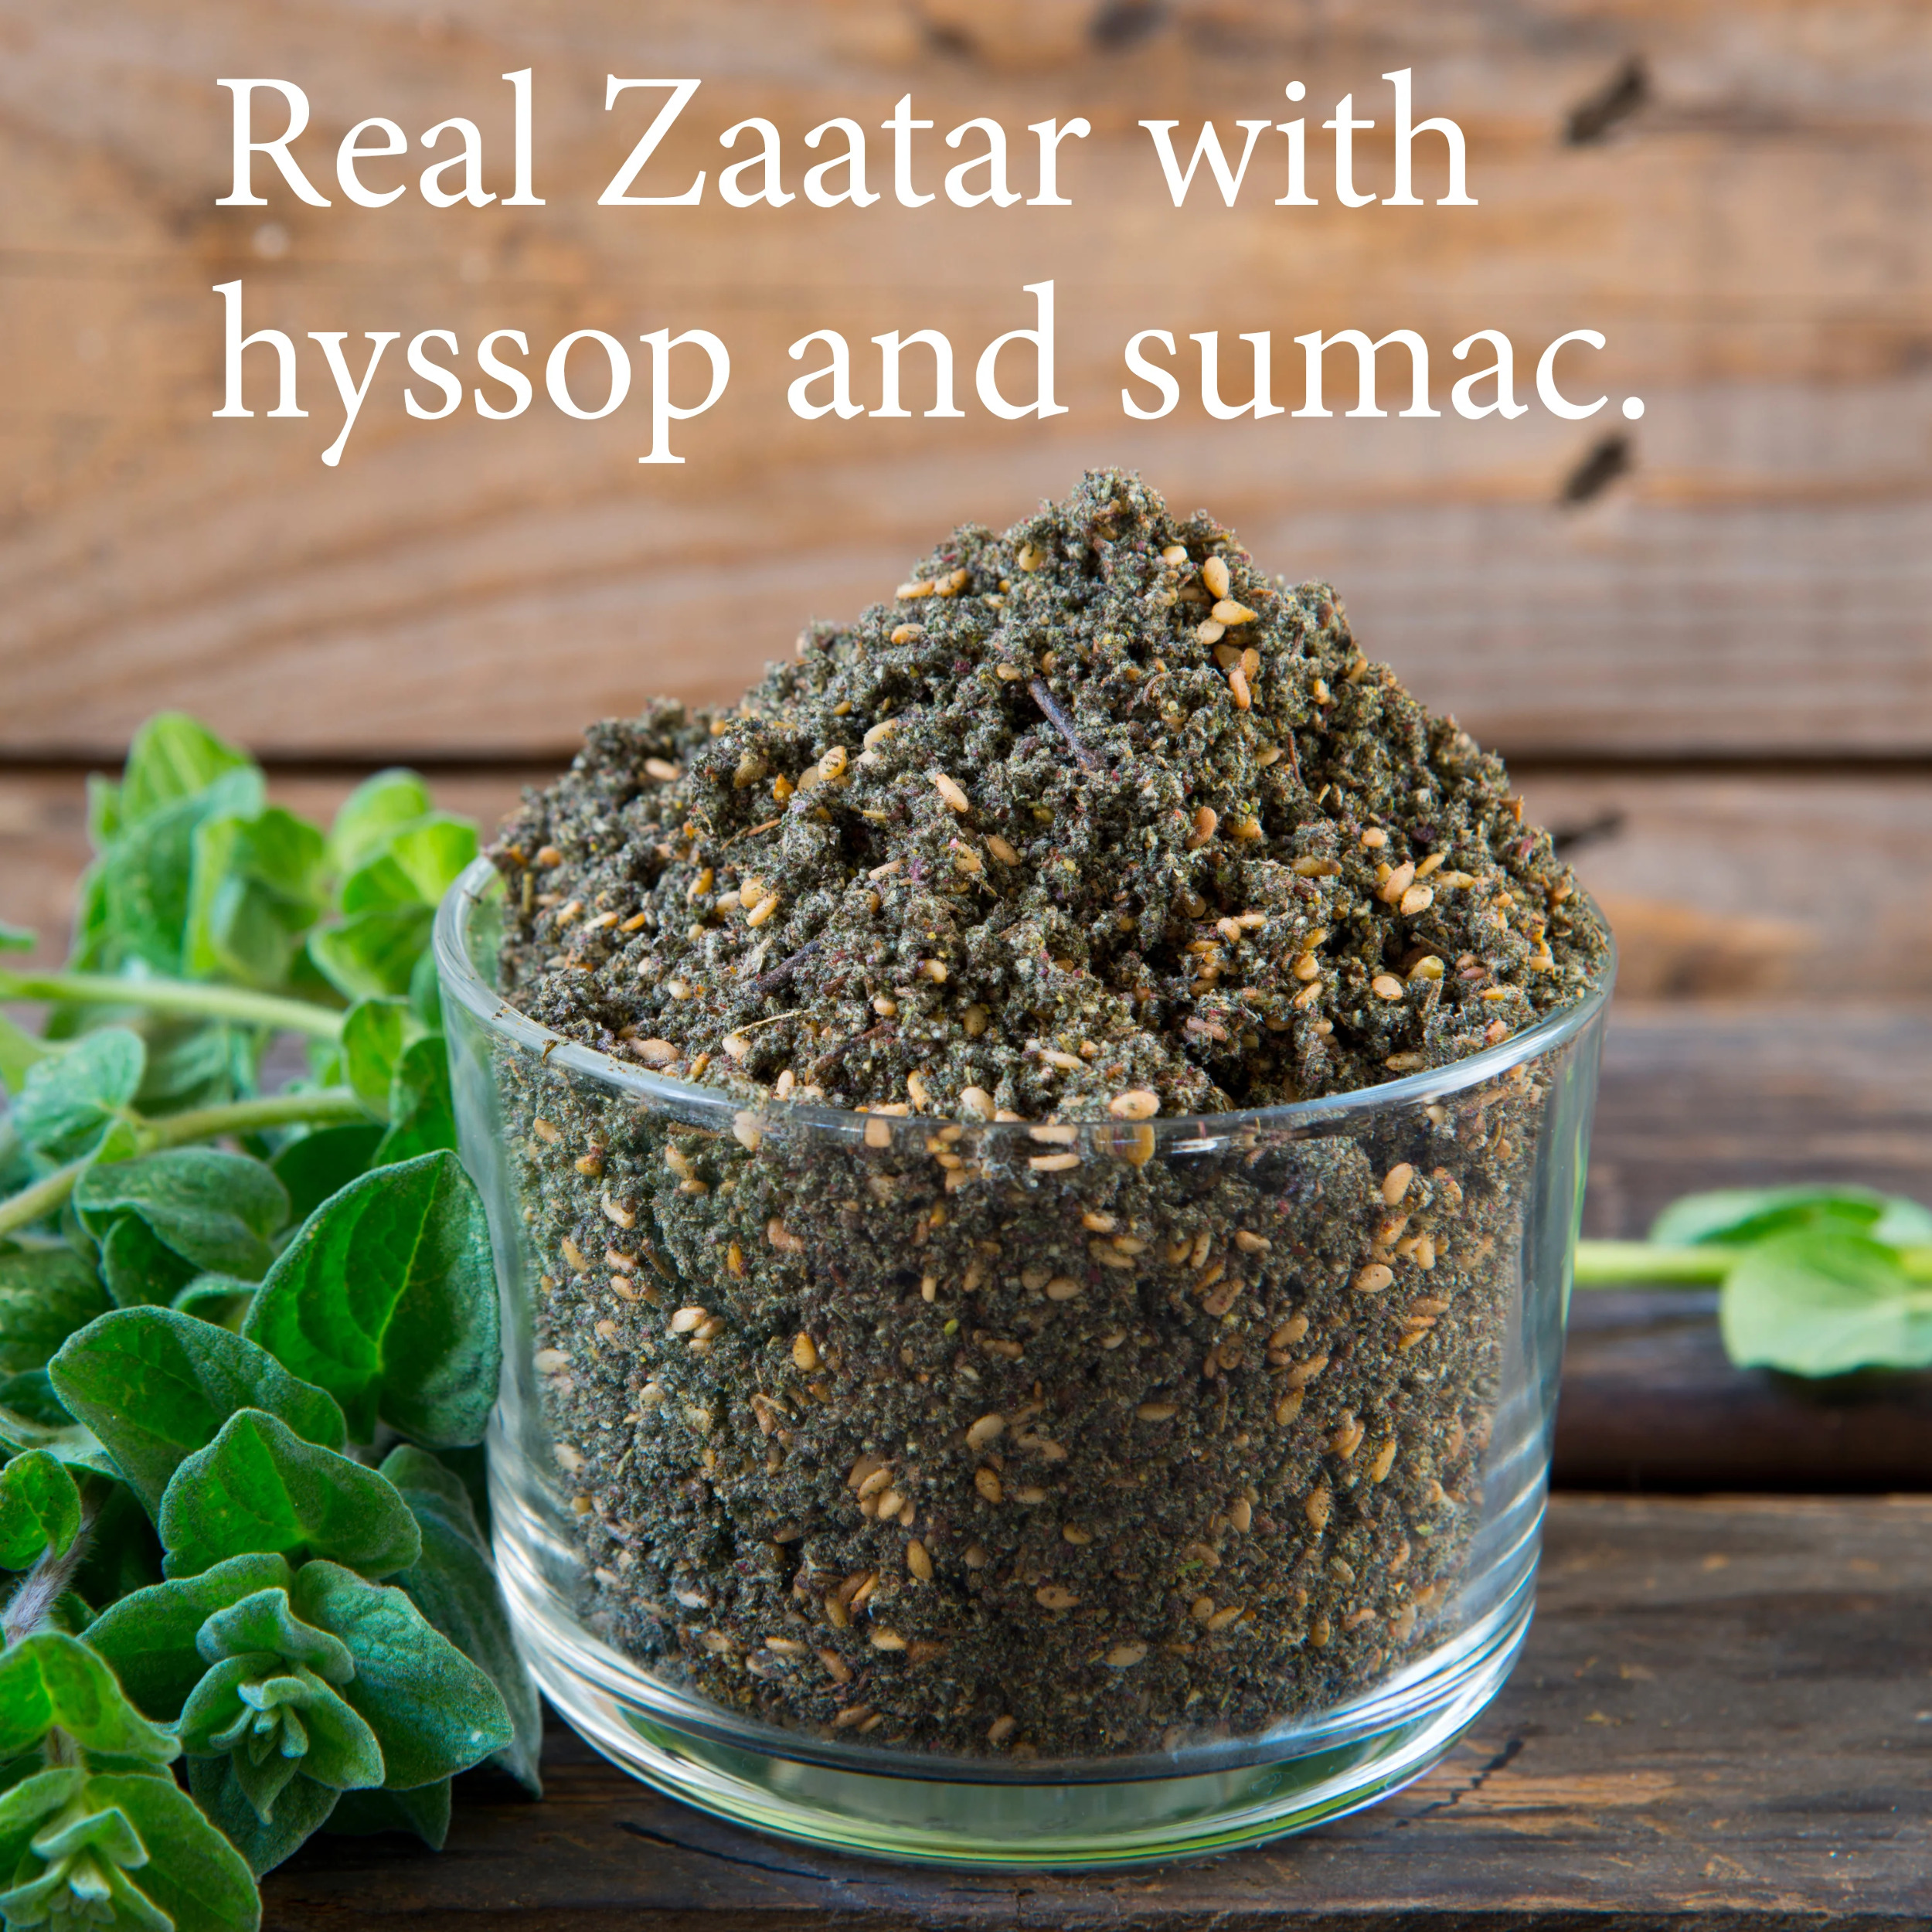 The Spice Way Real Zaatar - Middle Eastern Spice Blend – All Natural with Hyssop and Sumac - 4 oz. - image 4 of 8